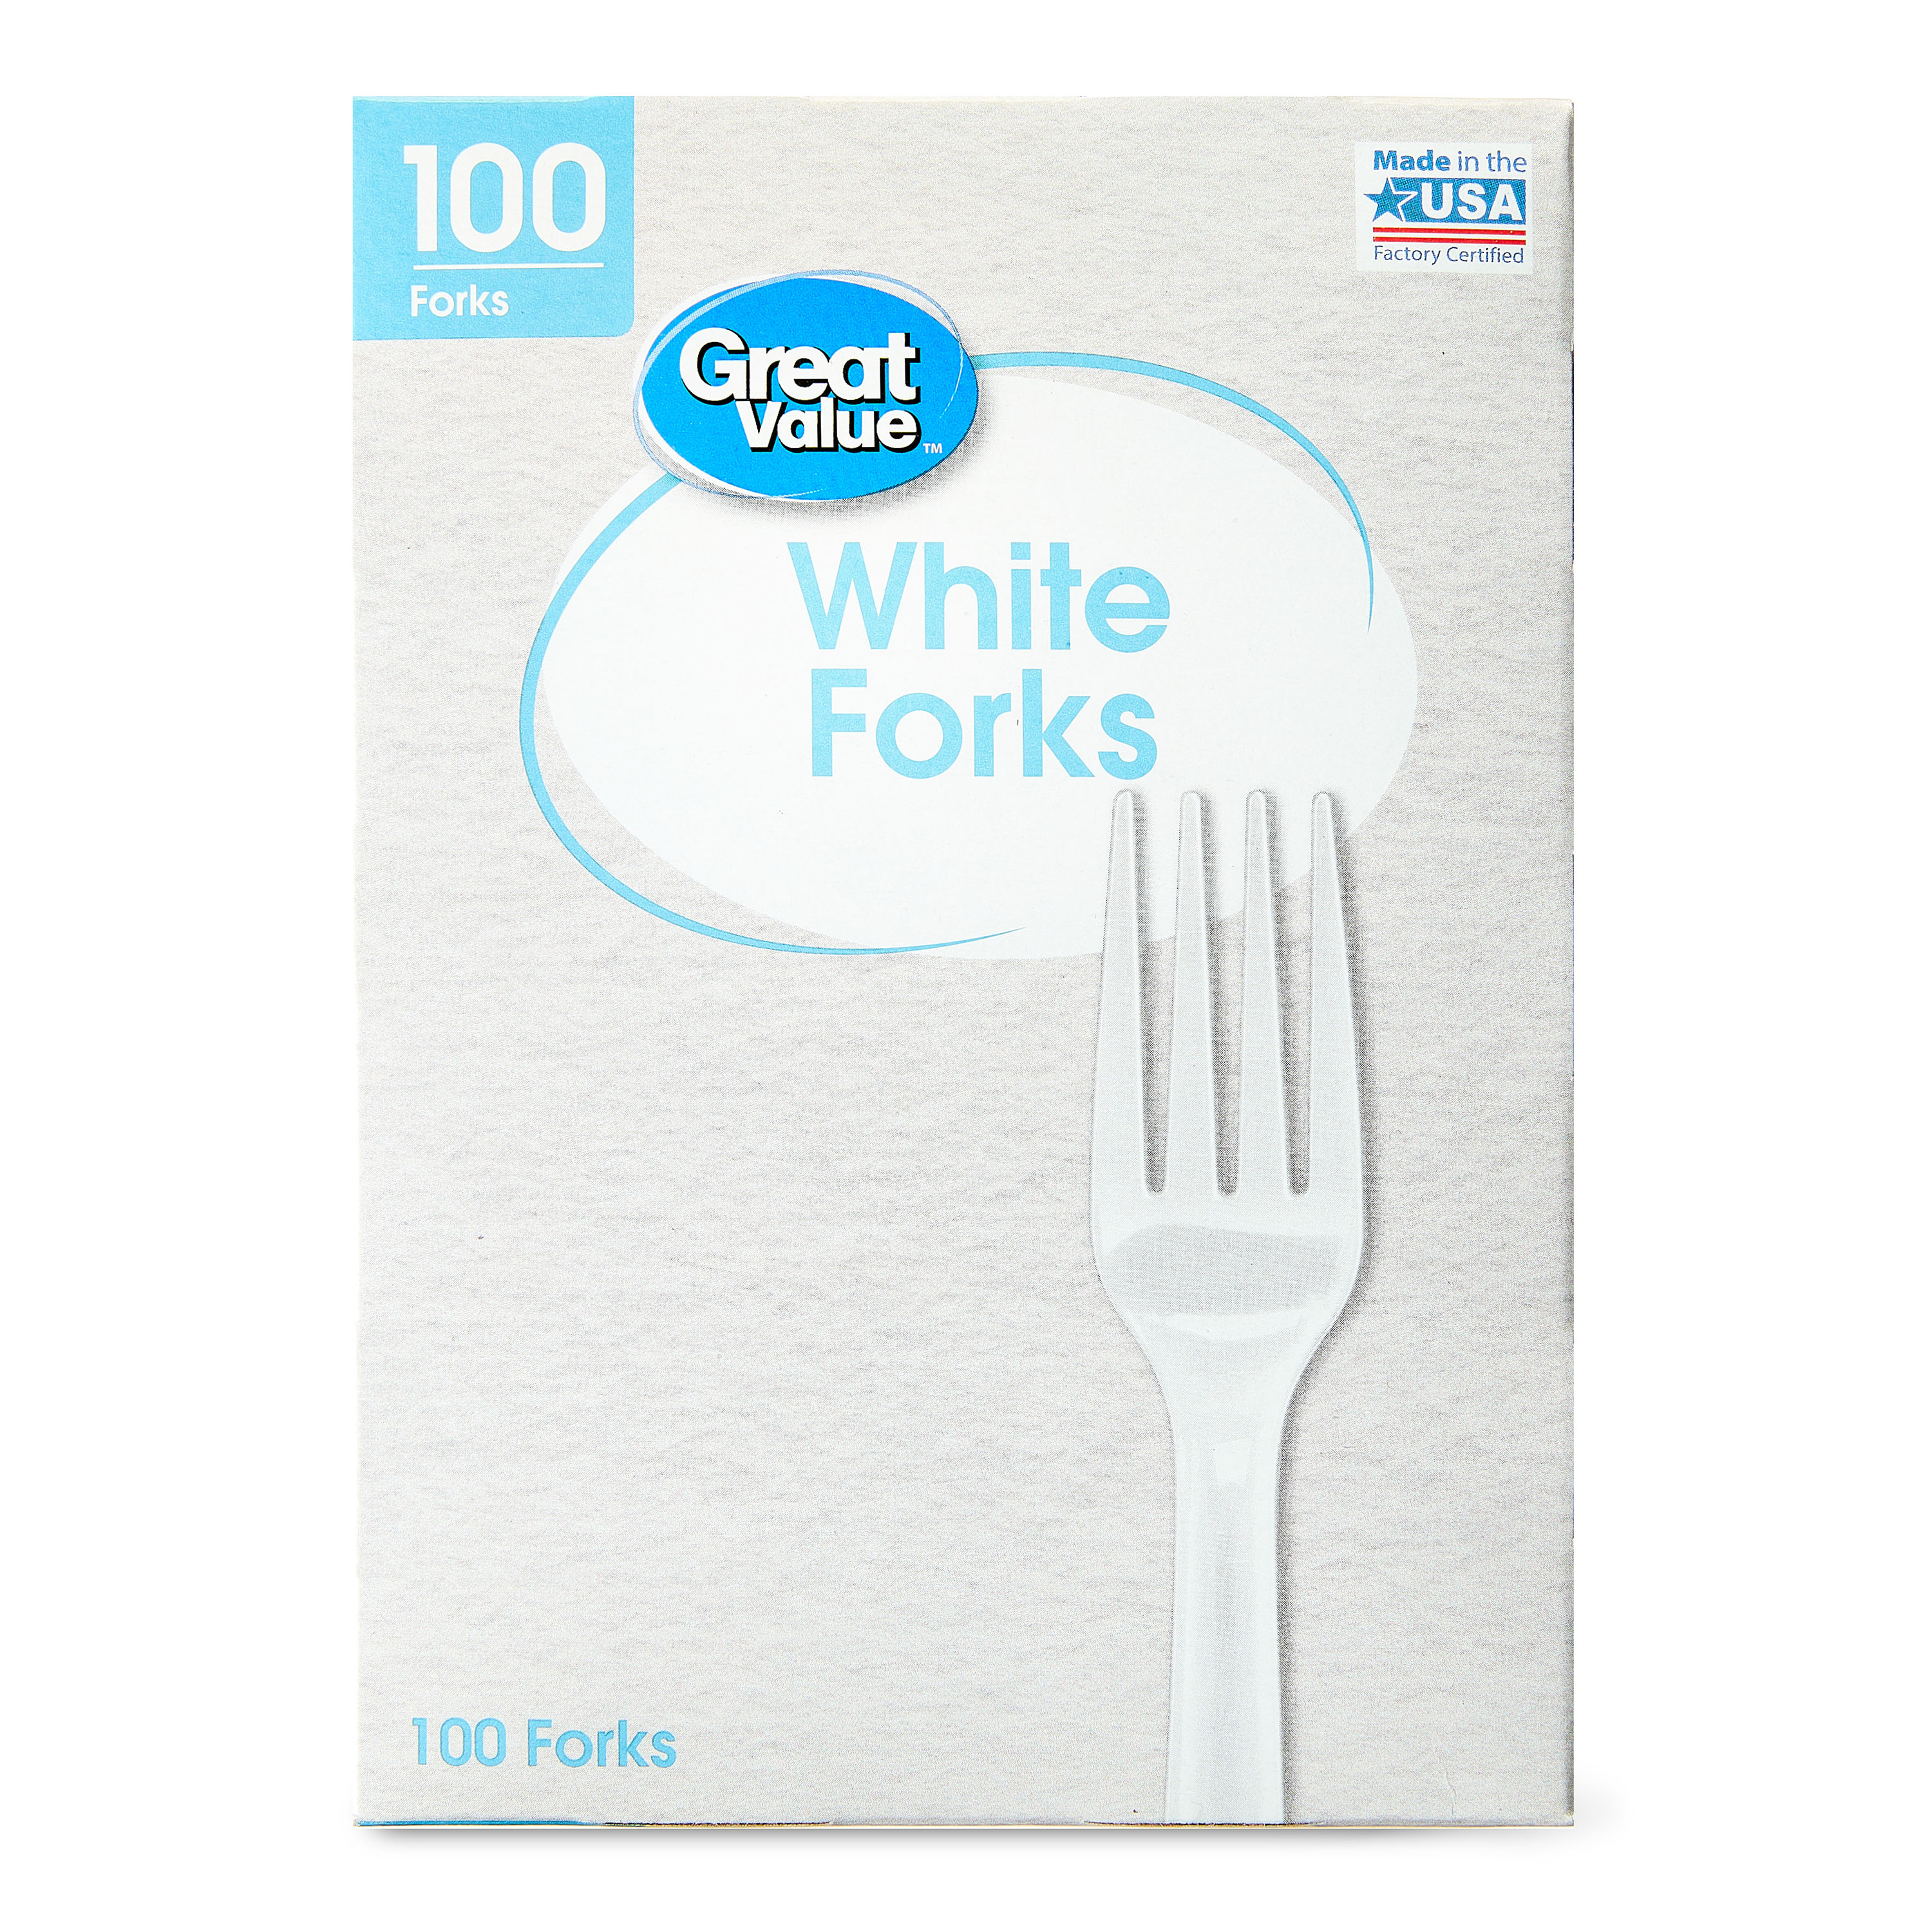 Great Value Everyday Disposable Plastic Forks, White, 100 Count - image 3 of 8